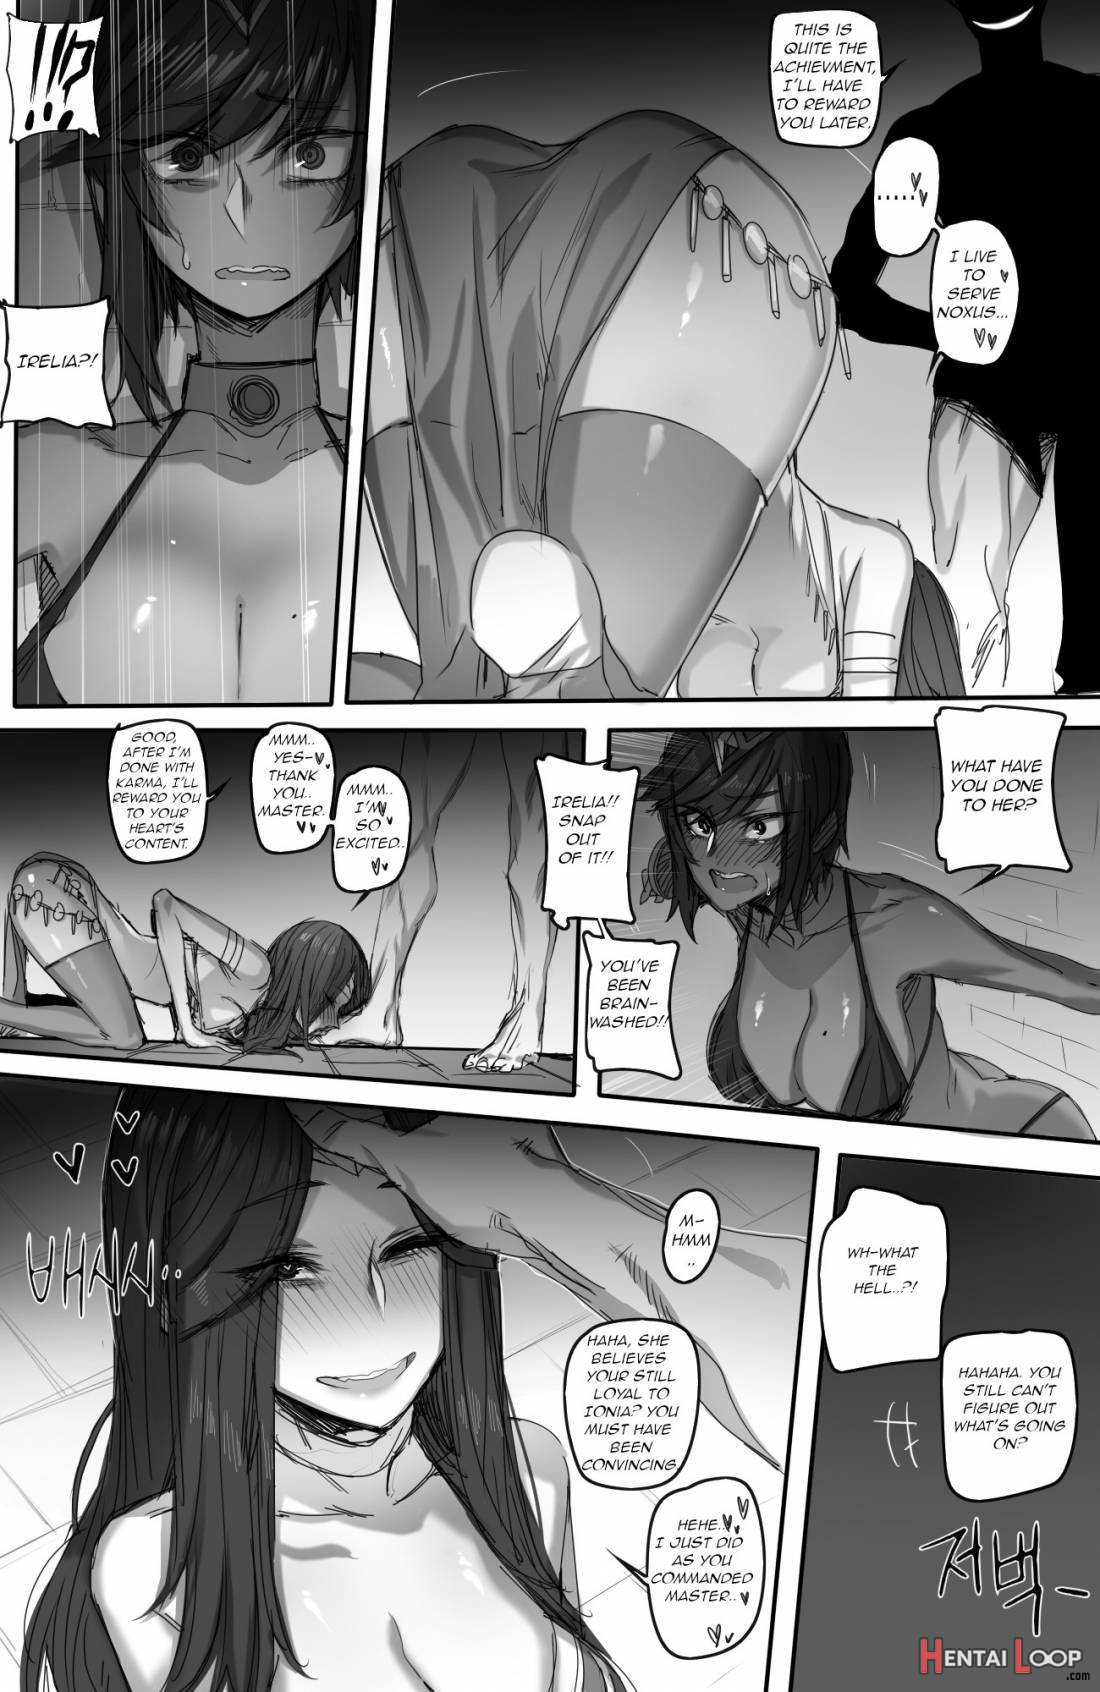 For the Noxus page 8